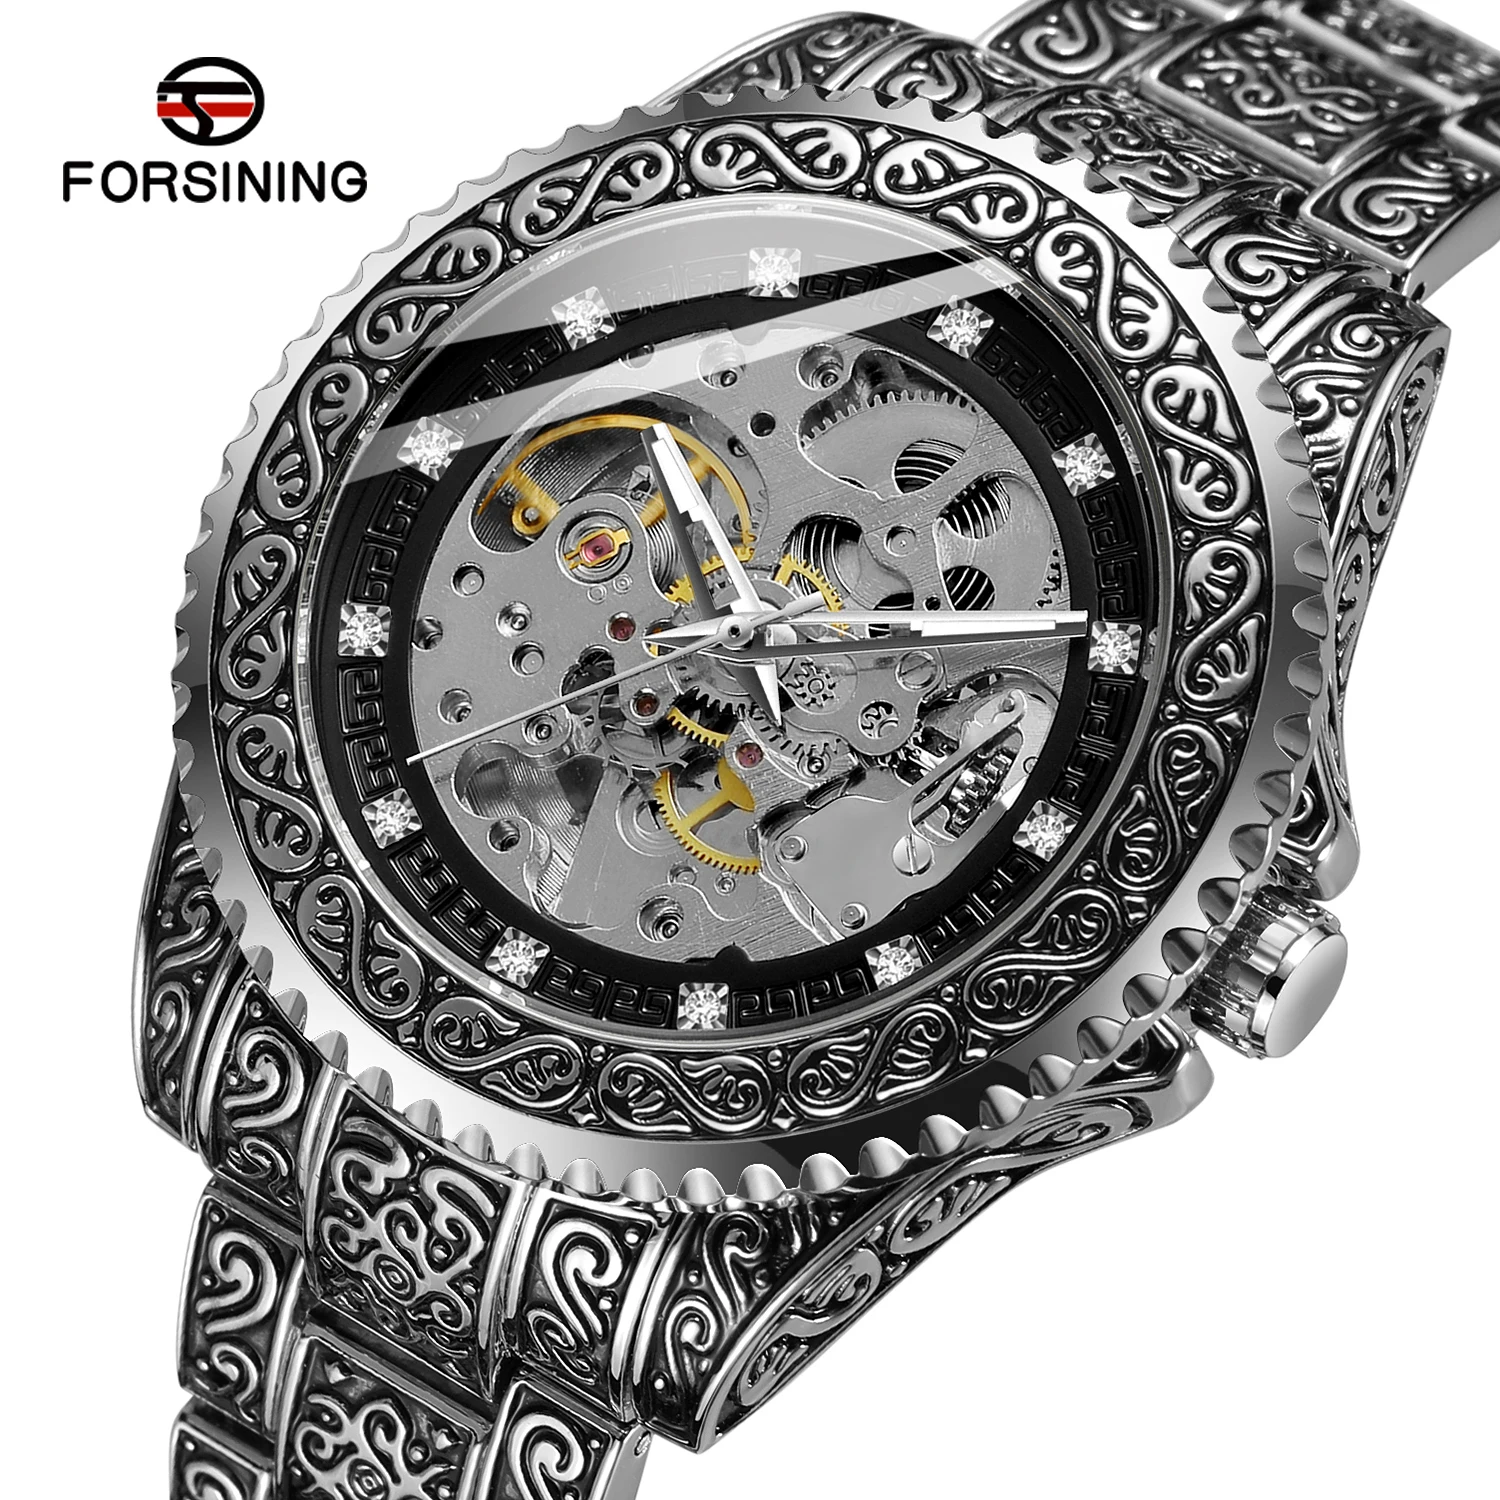 

Forsining Men Retro Classic Skeleton Mechanical Watch Automatic Business Luxury Wrist Watches for Man Relogio Masculino Clock